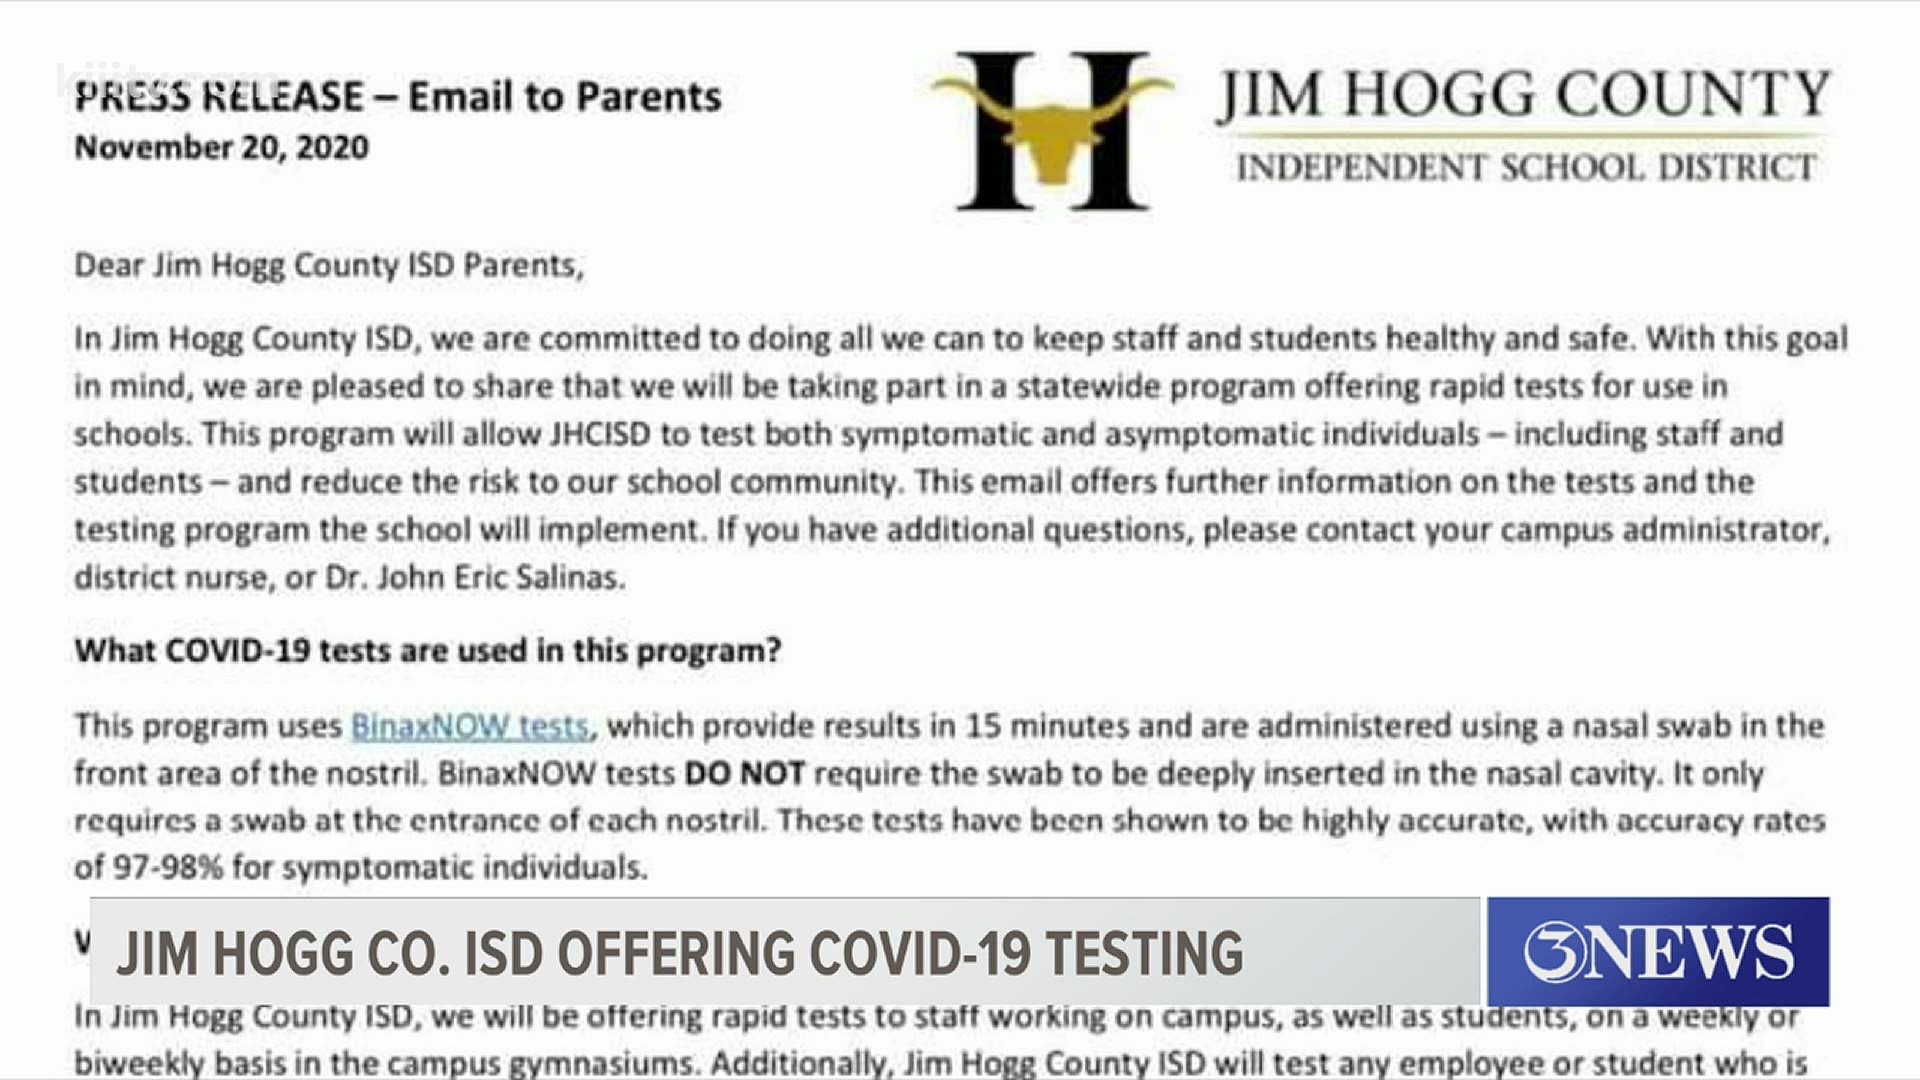 At Jim Hogg County schools, classes will be starting later than normal to allow students time to go through the testing site set up at the school.